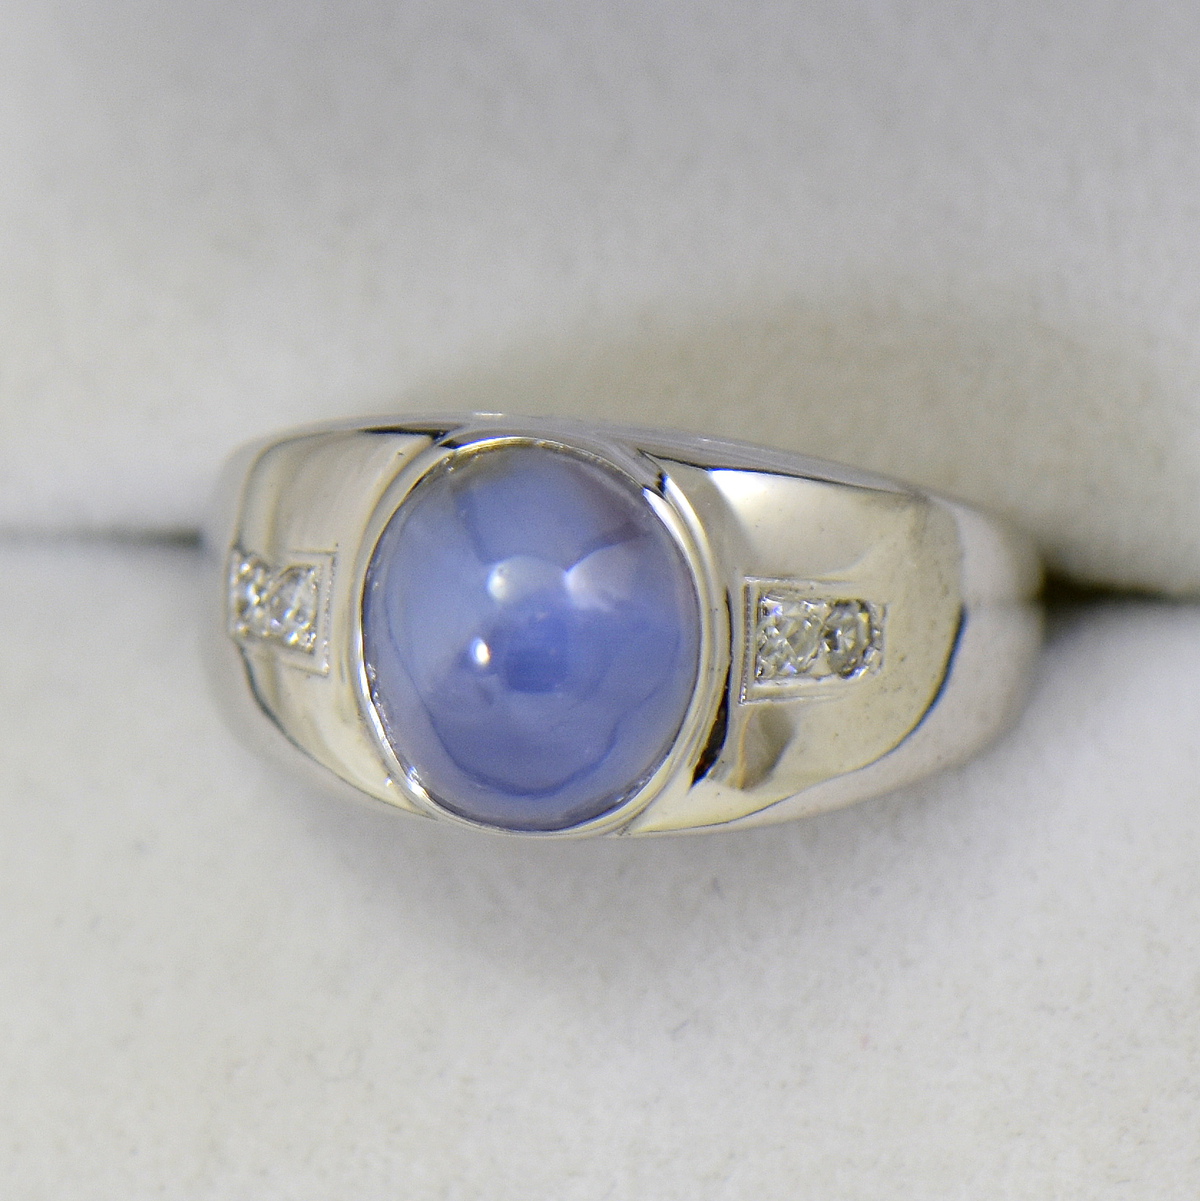 Blue Star Sapphire Men's Ring circa 1930s | Exquisite Jewelry for Every ...